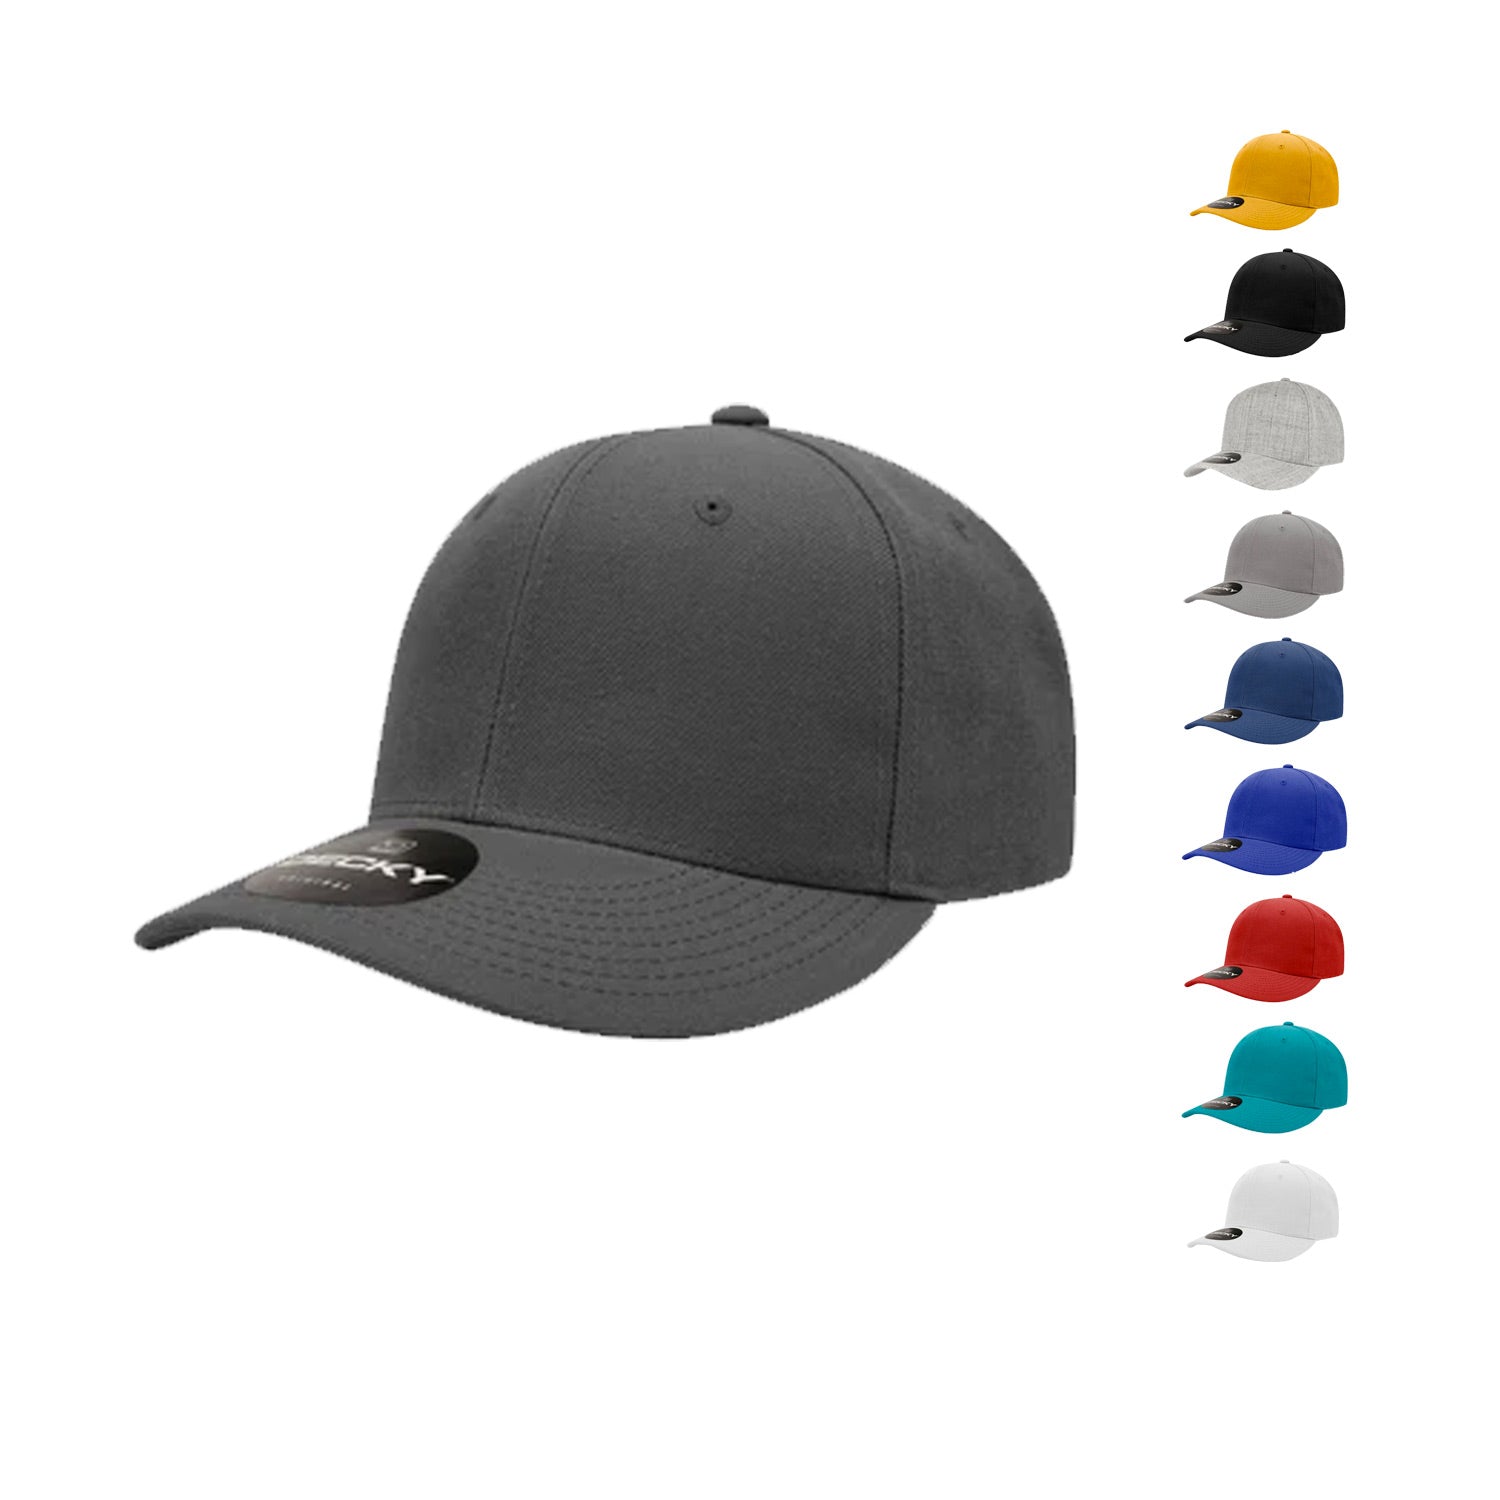 Decky 1040 Trucker Snapback Structured Caps Profile Hats Panel Blank 5 High